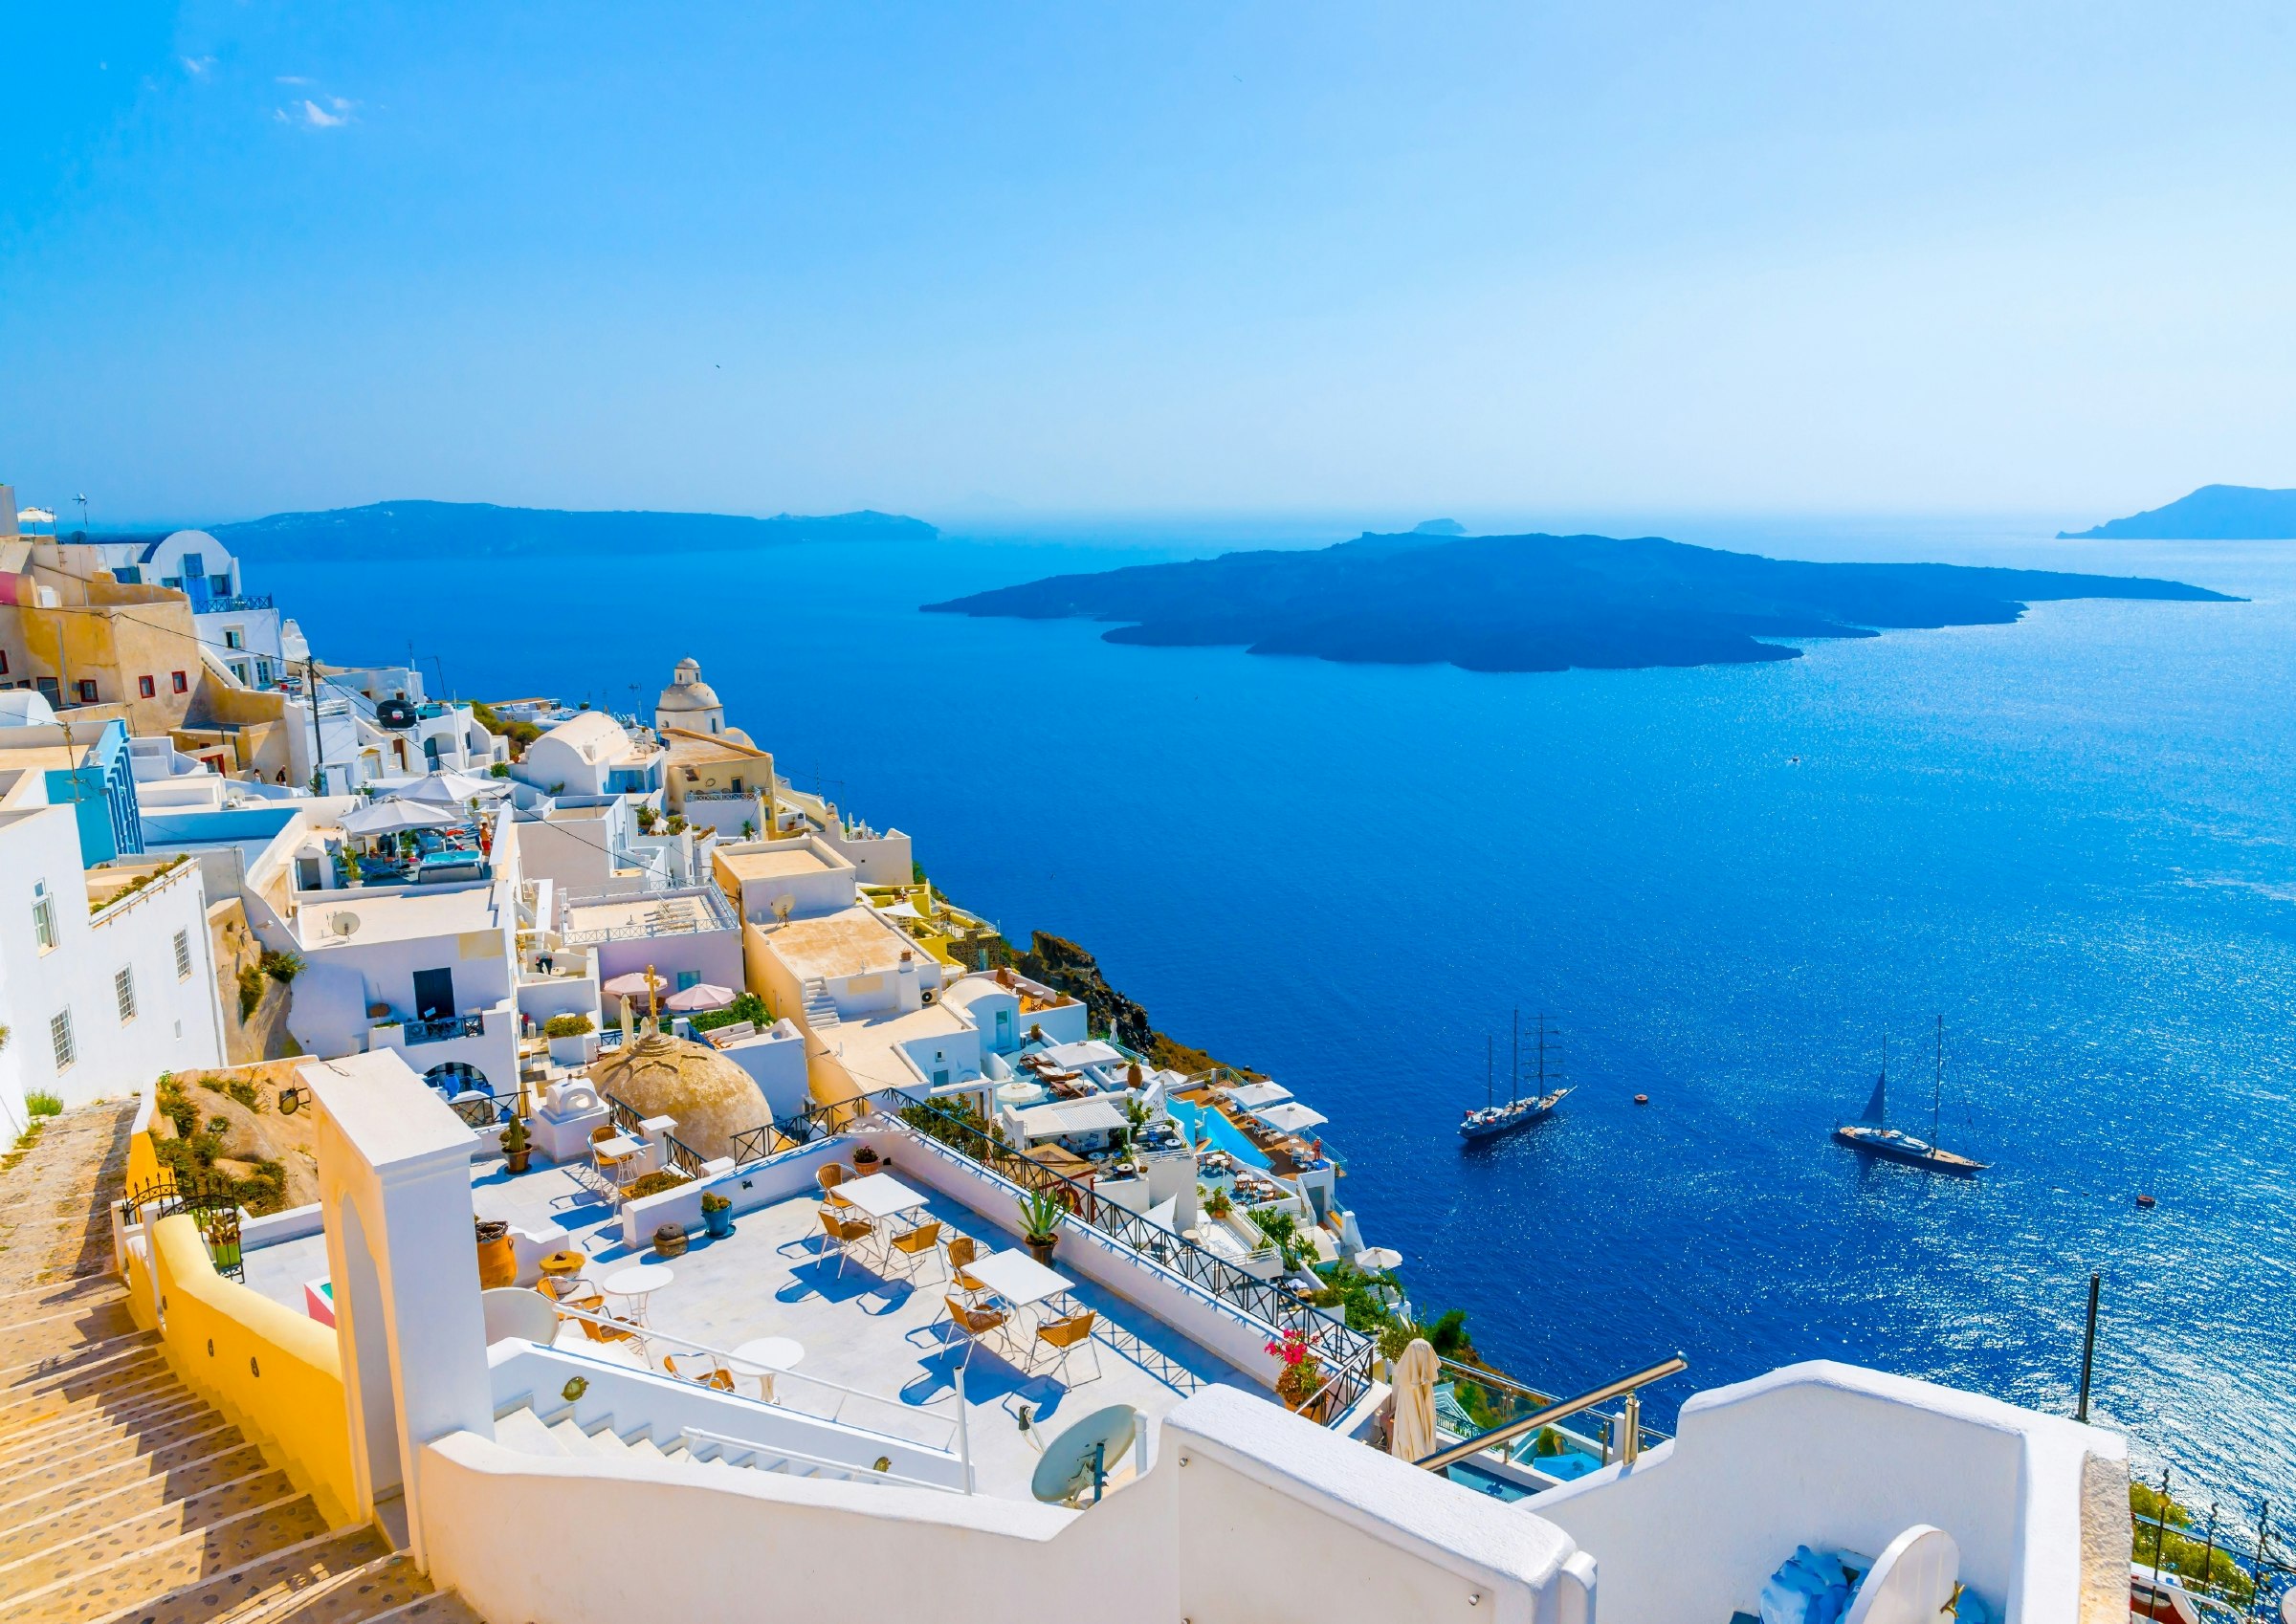 View to the sea and Volcano from Fira, the capital of Santorini in Greece